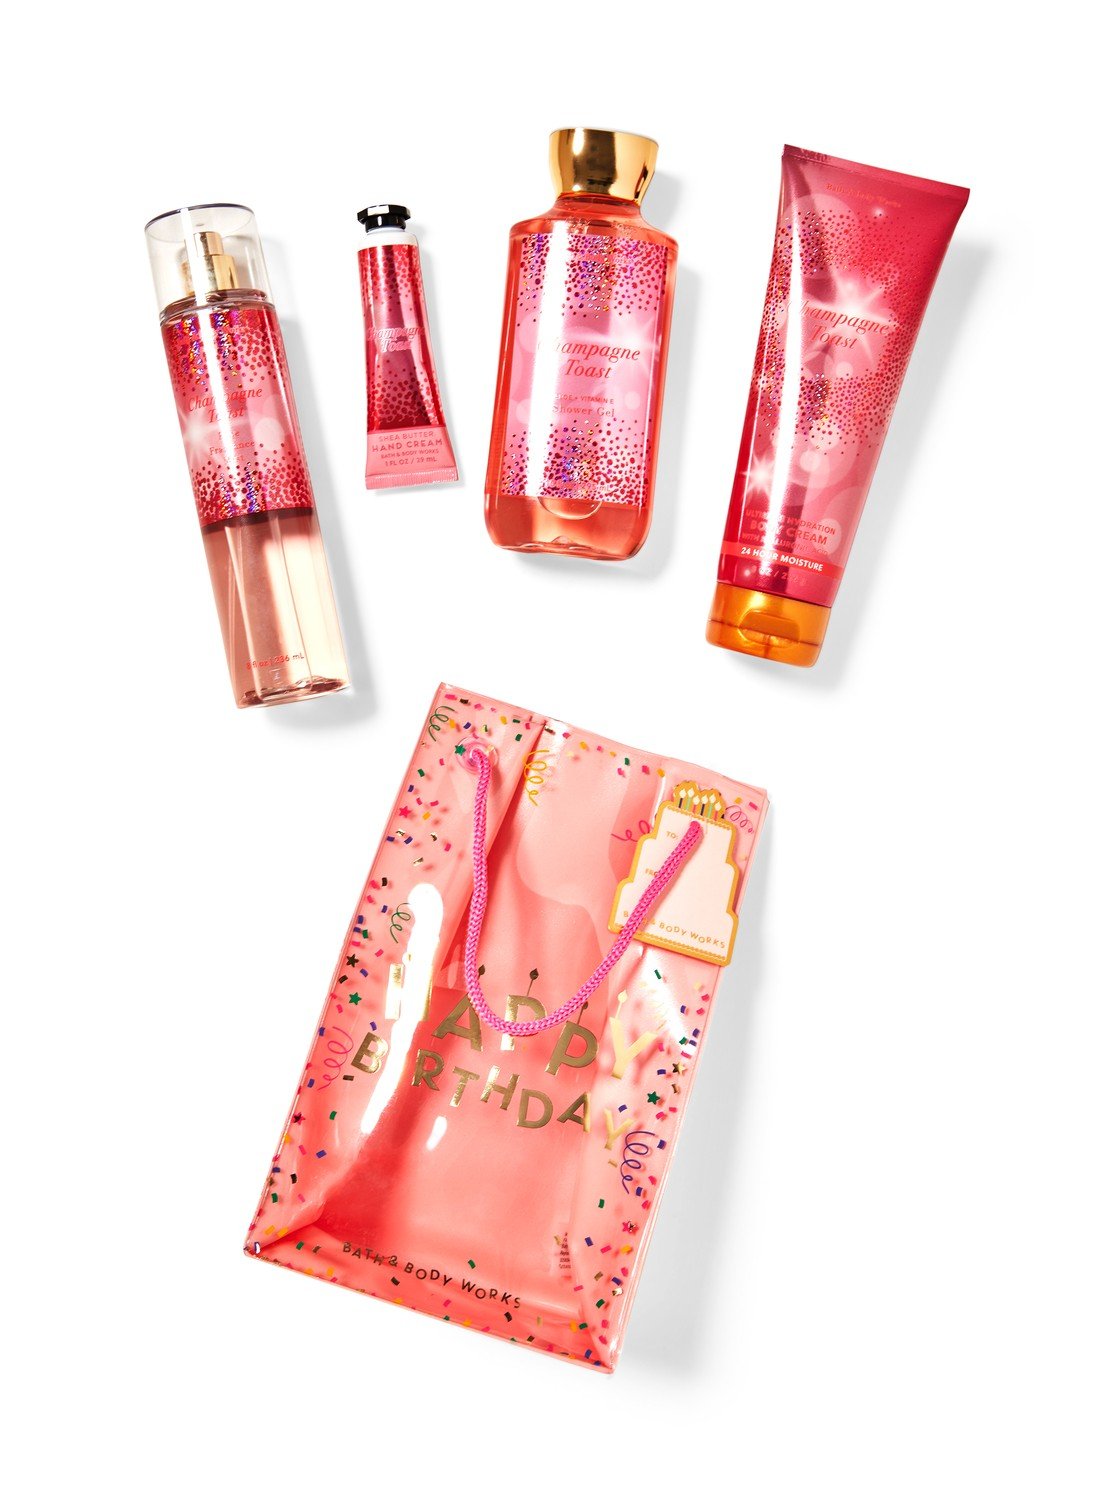 Champagne Toast| Bath & Body Works Malaysia Official Site